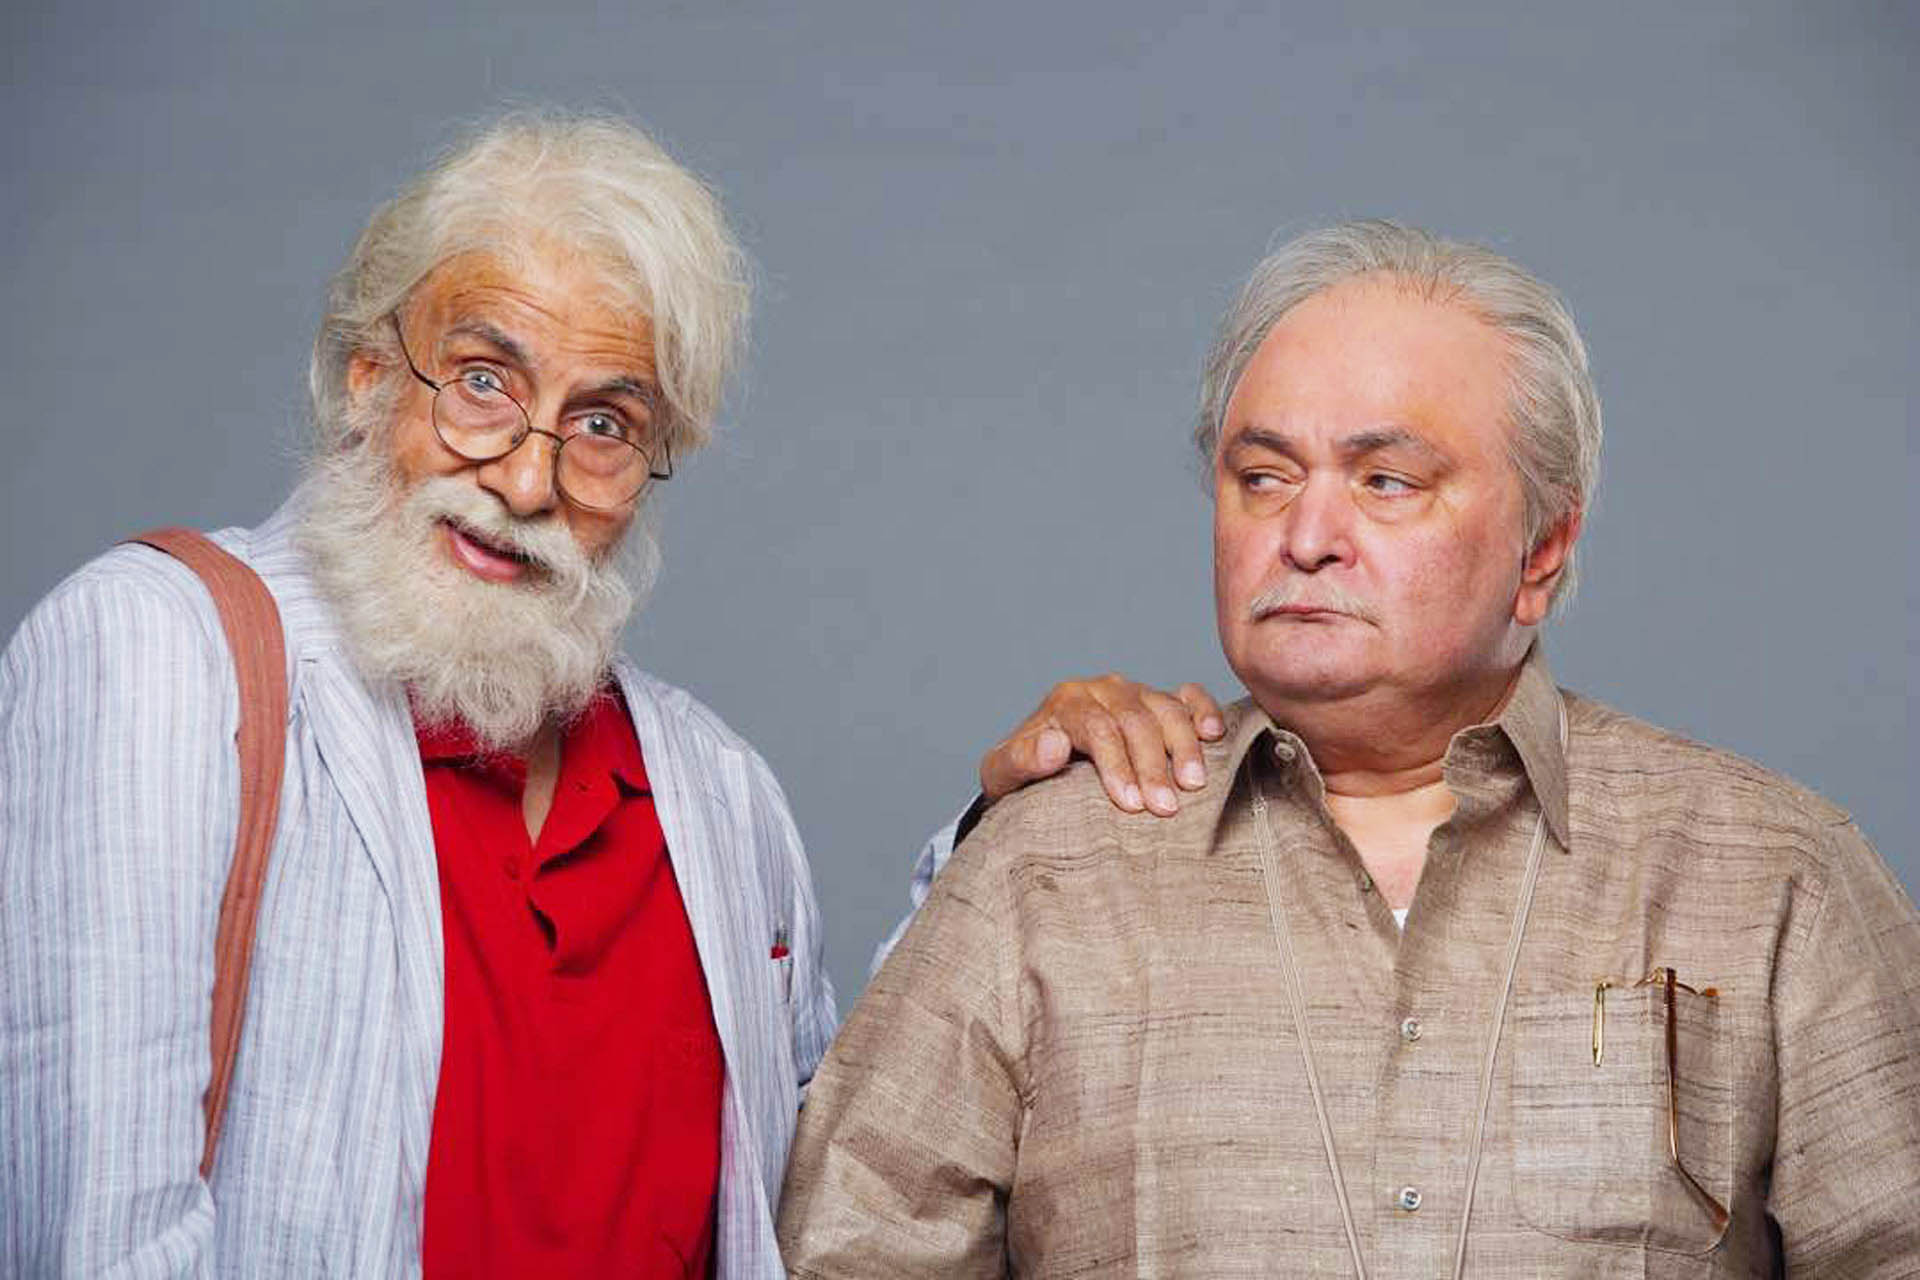 Amitabh Bachchan and Rishi Kapoor in 102 Not Out. (Image courtesy - Google)